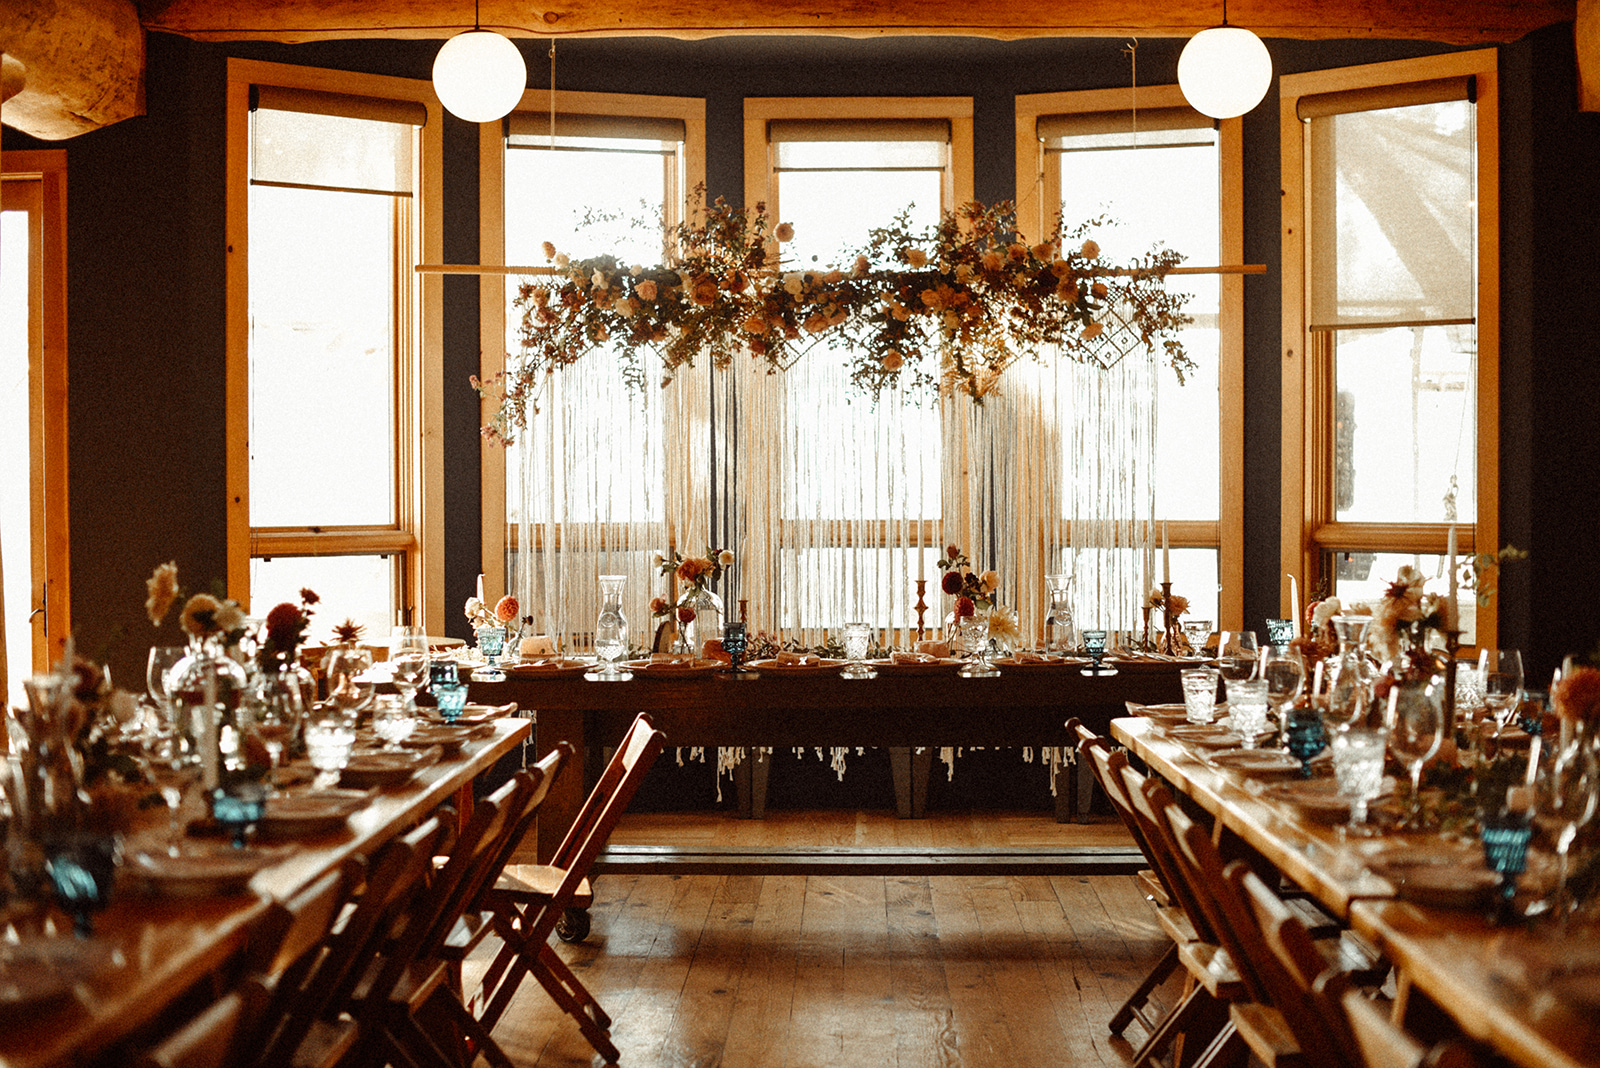 Suttle+Lake+wedding+specialty+tabletop+decor+event+rentals+Bend+Oregon+Curated+The+Moody+Romantic+Photography.jpg